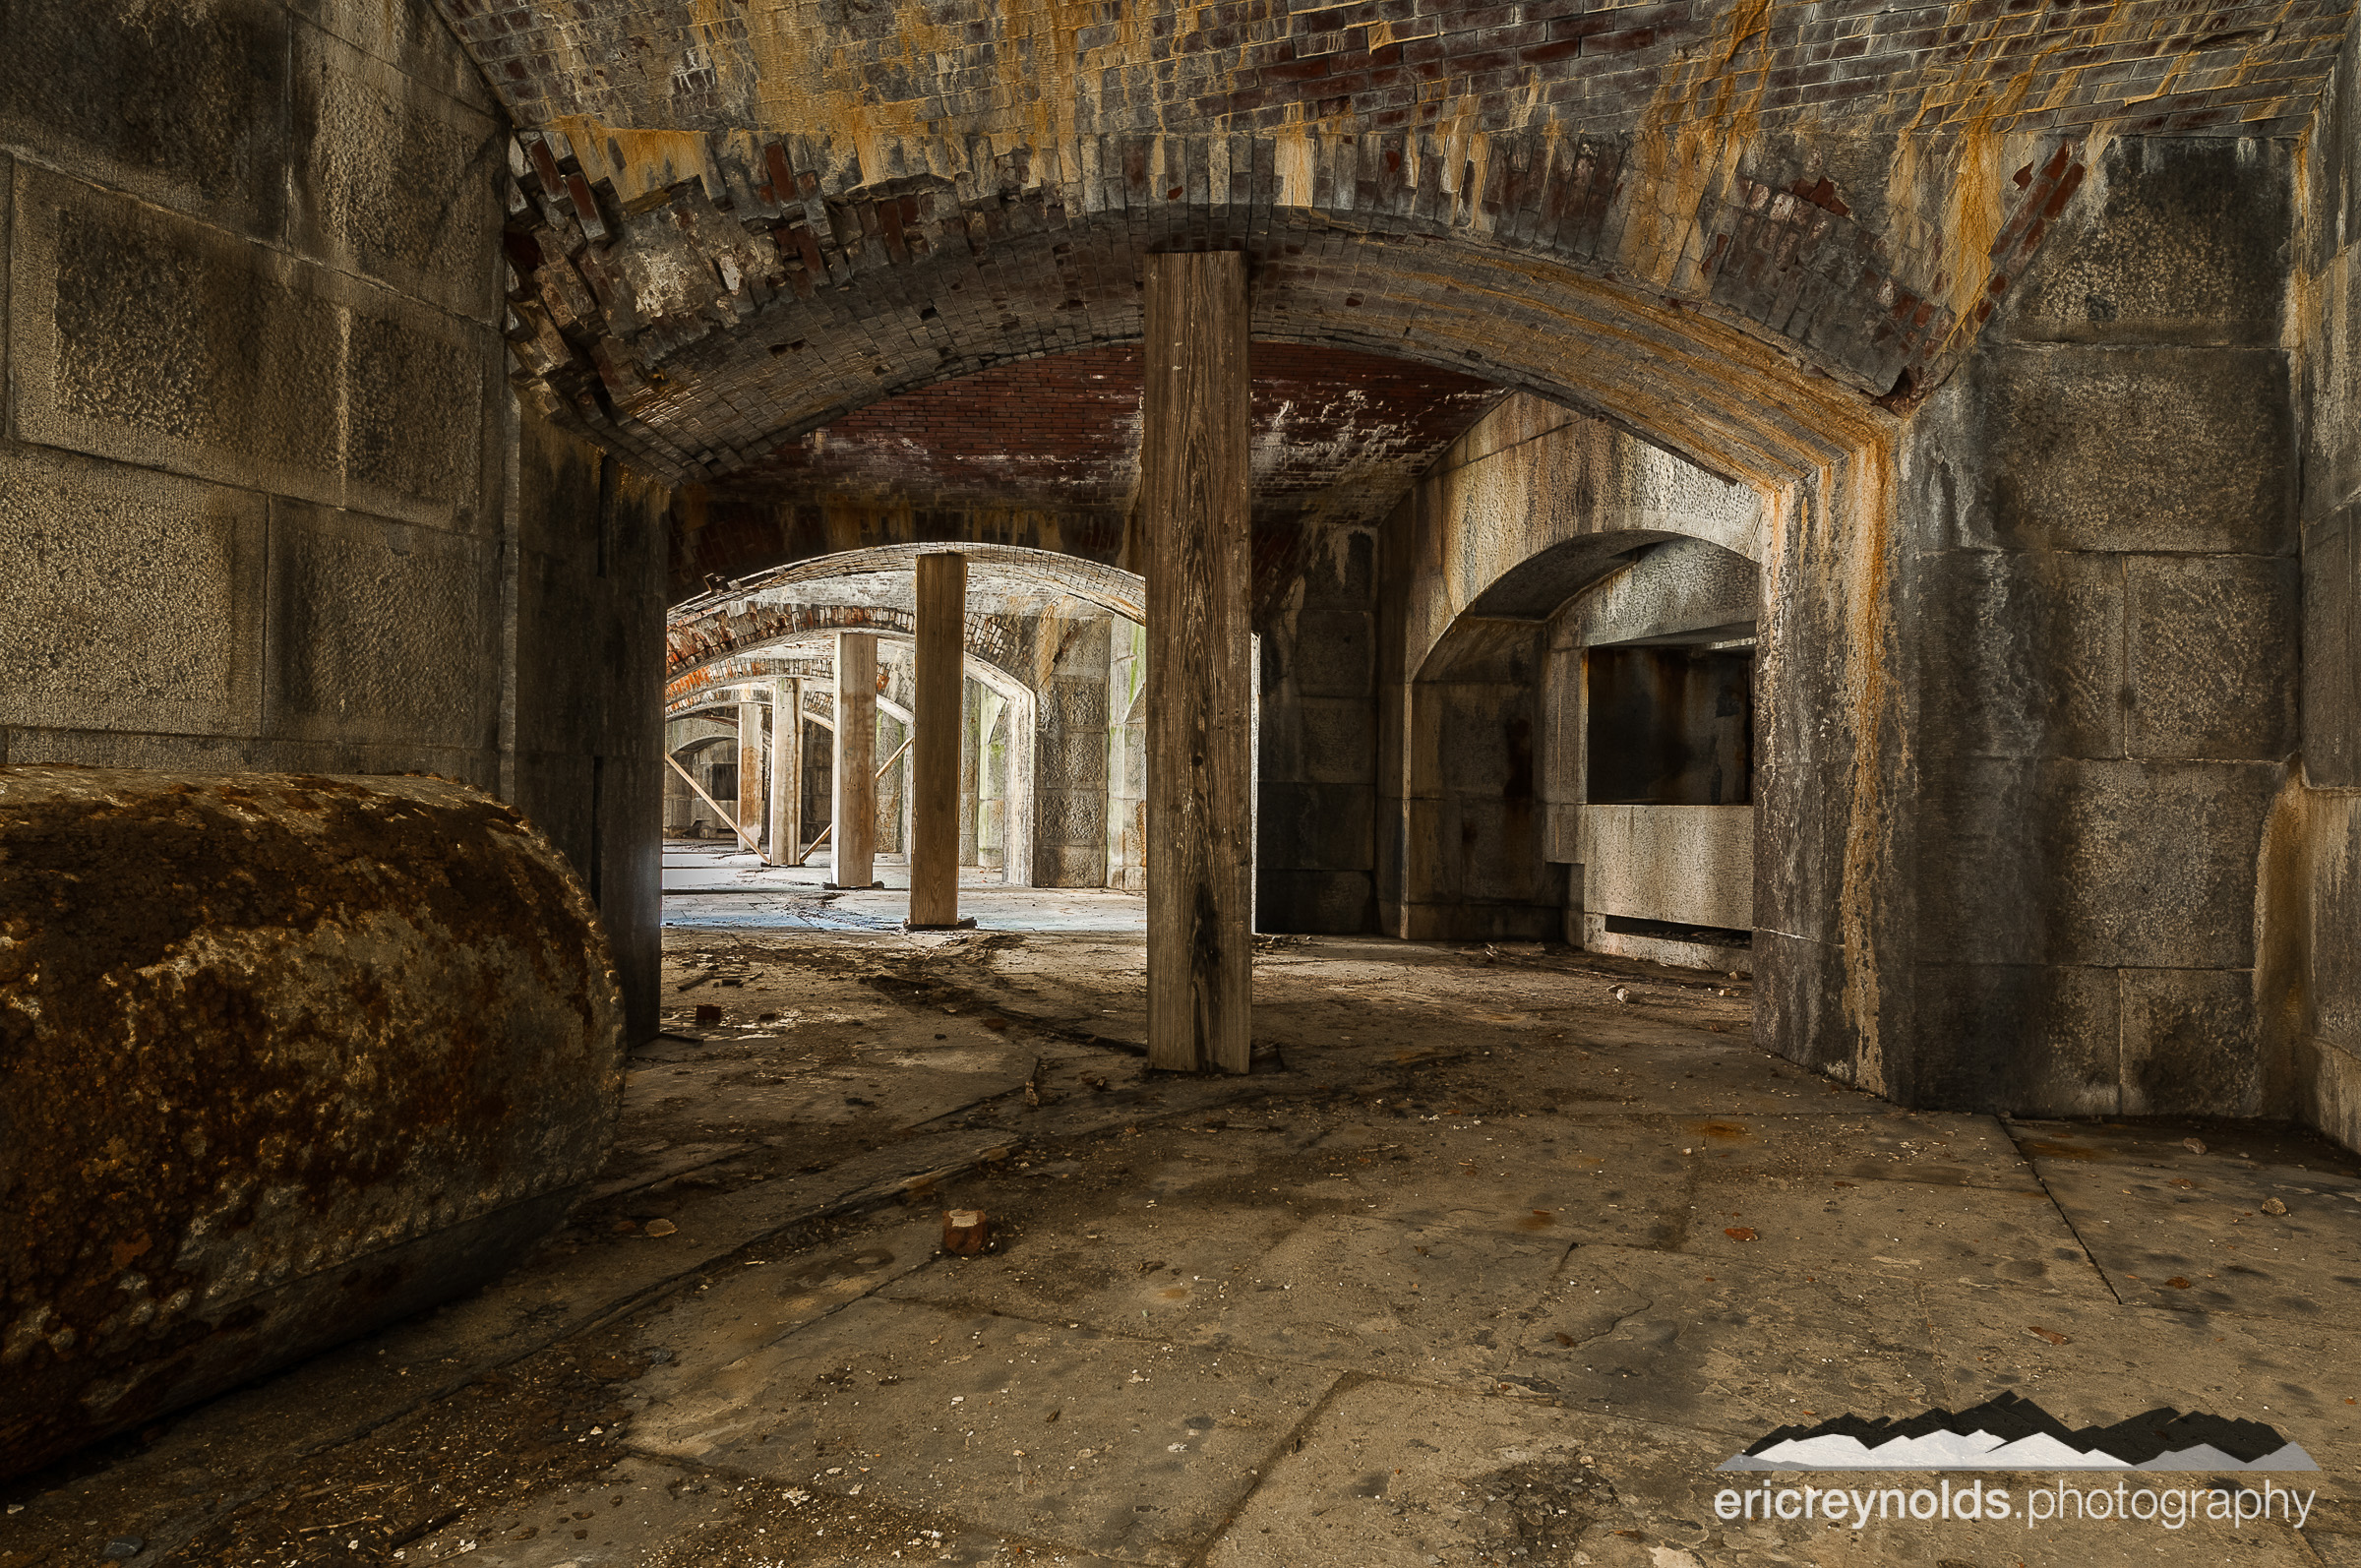 Tunnels of Fort Rodman by Eric Reynolds - Landscape Photographer